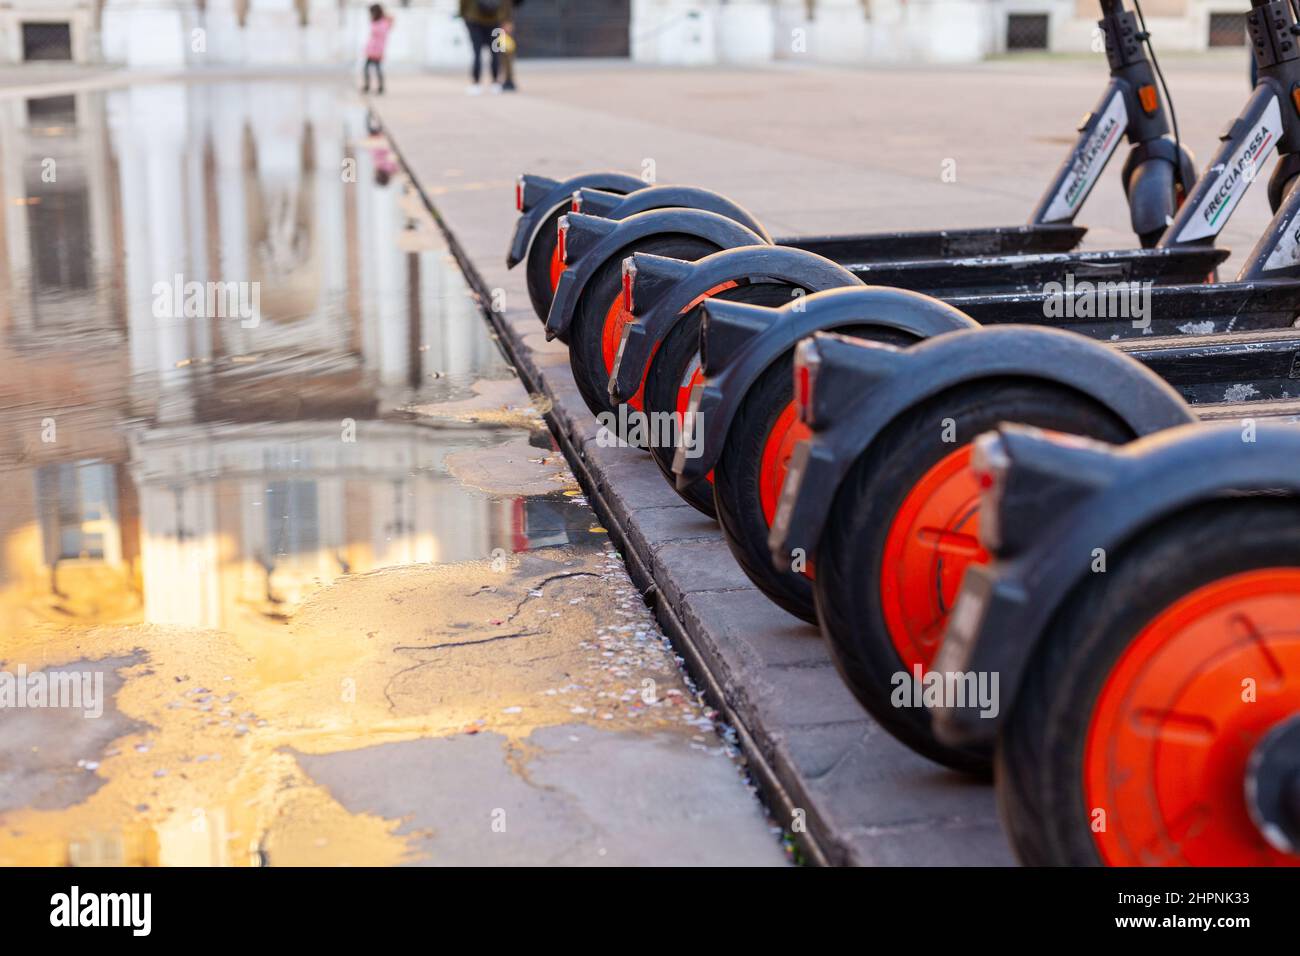 A row of sharing electric scooters wheels in a public city square in Modena, Italy Stock Photo